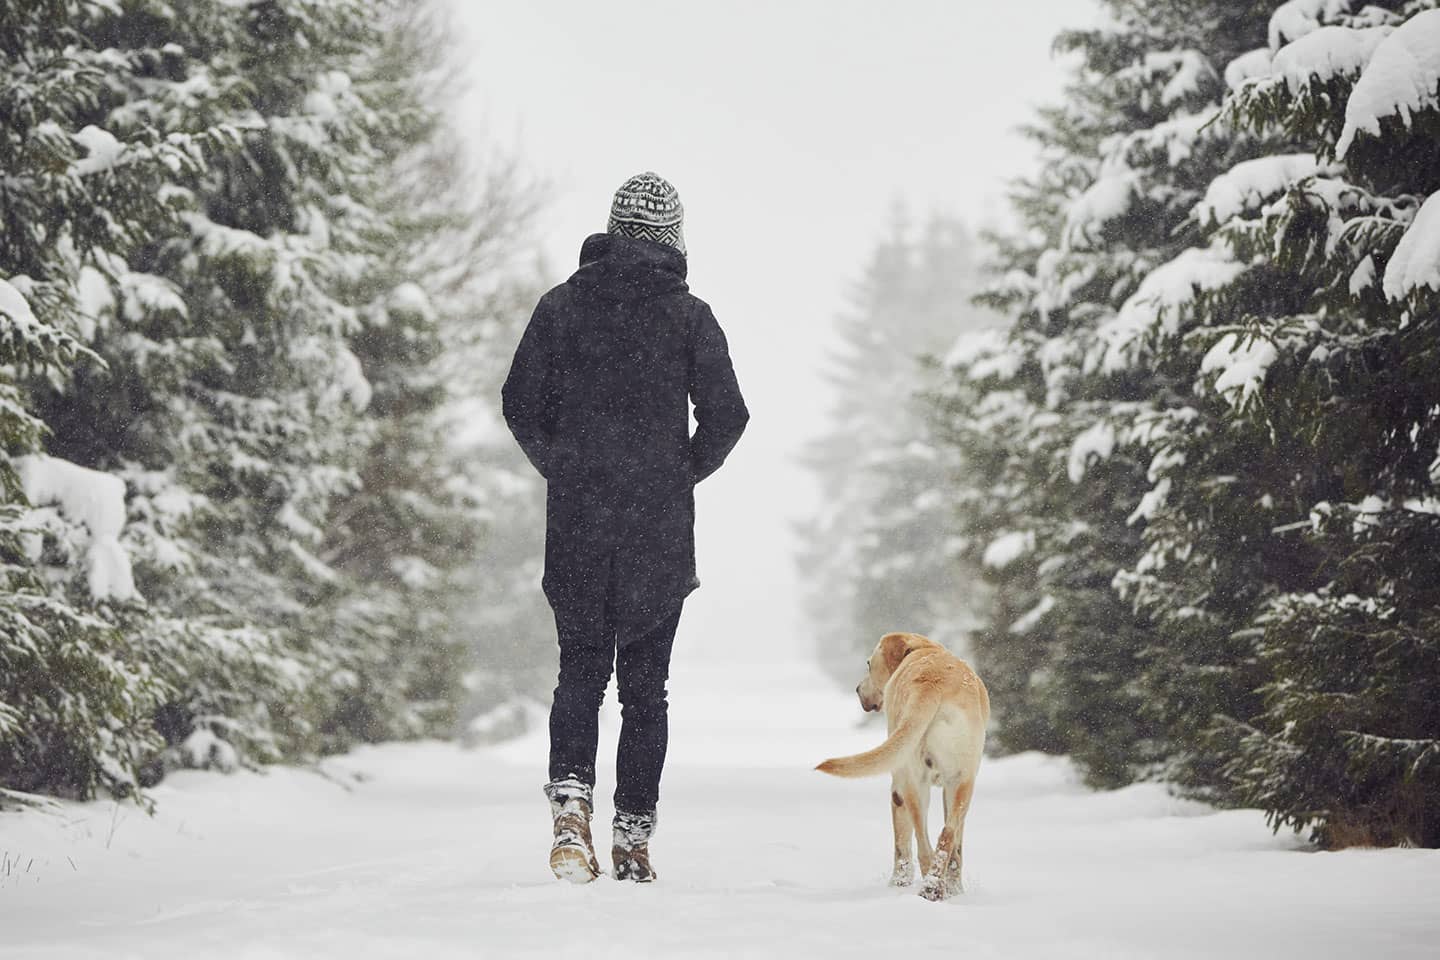 Woman in winter clothes walking dog down snow-covered trail.